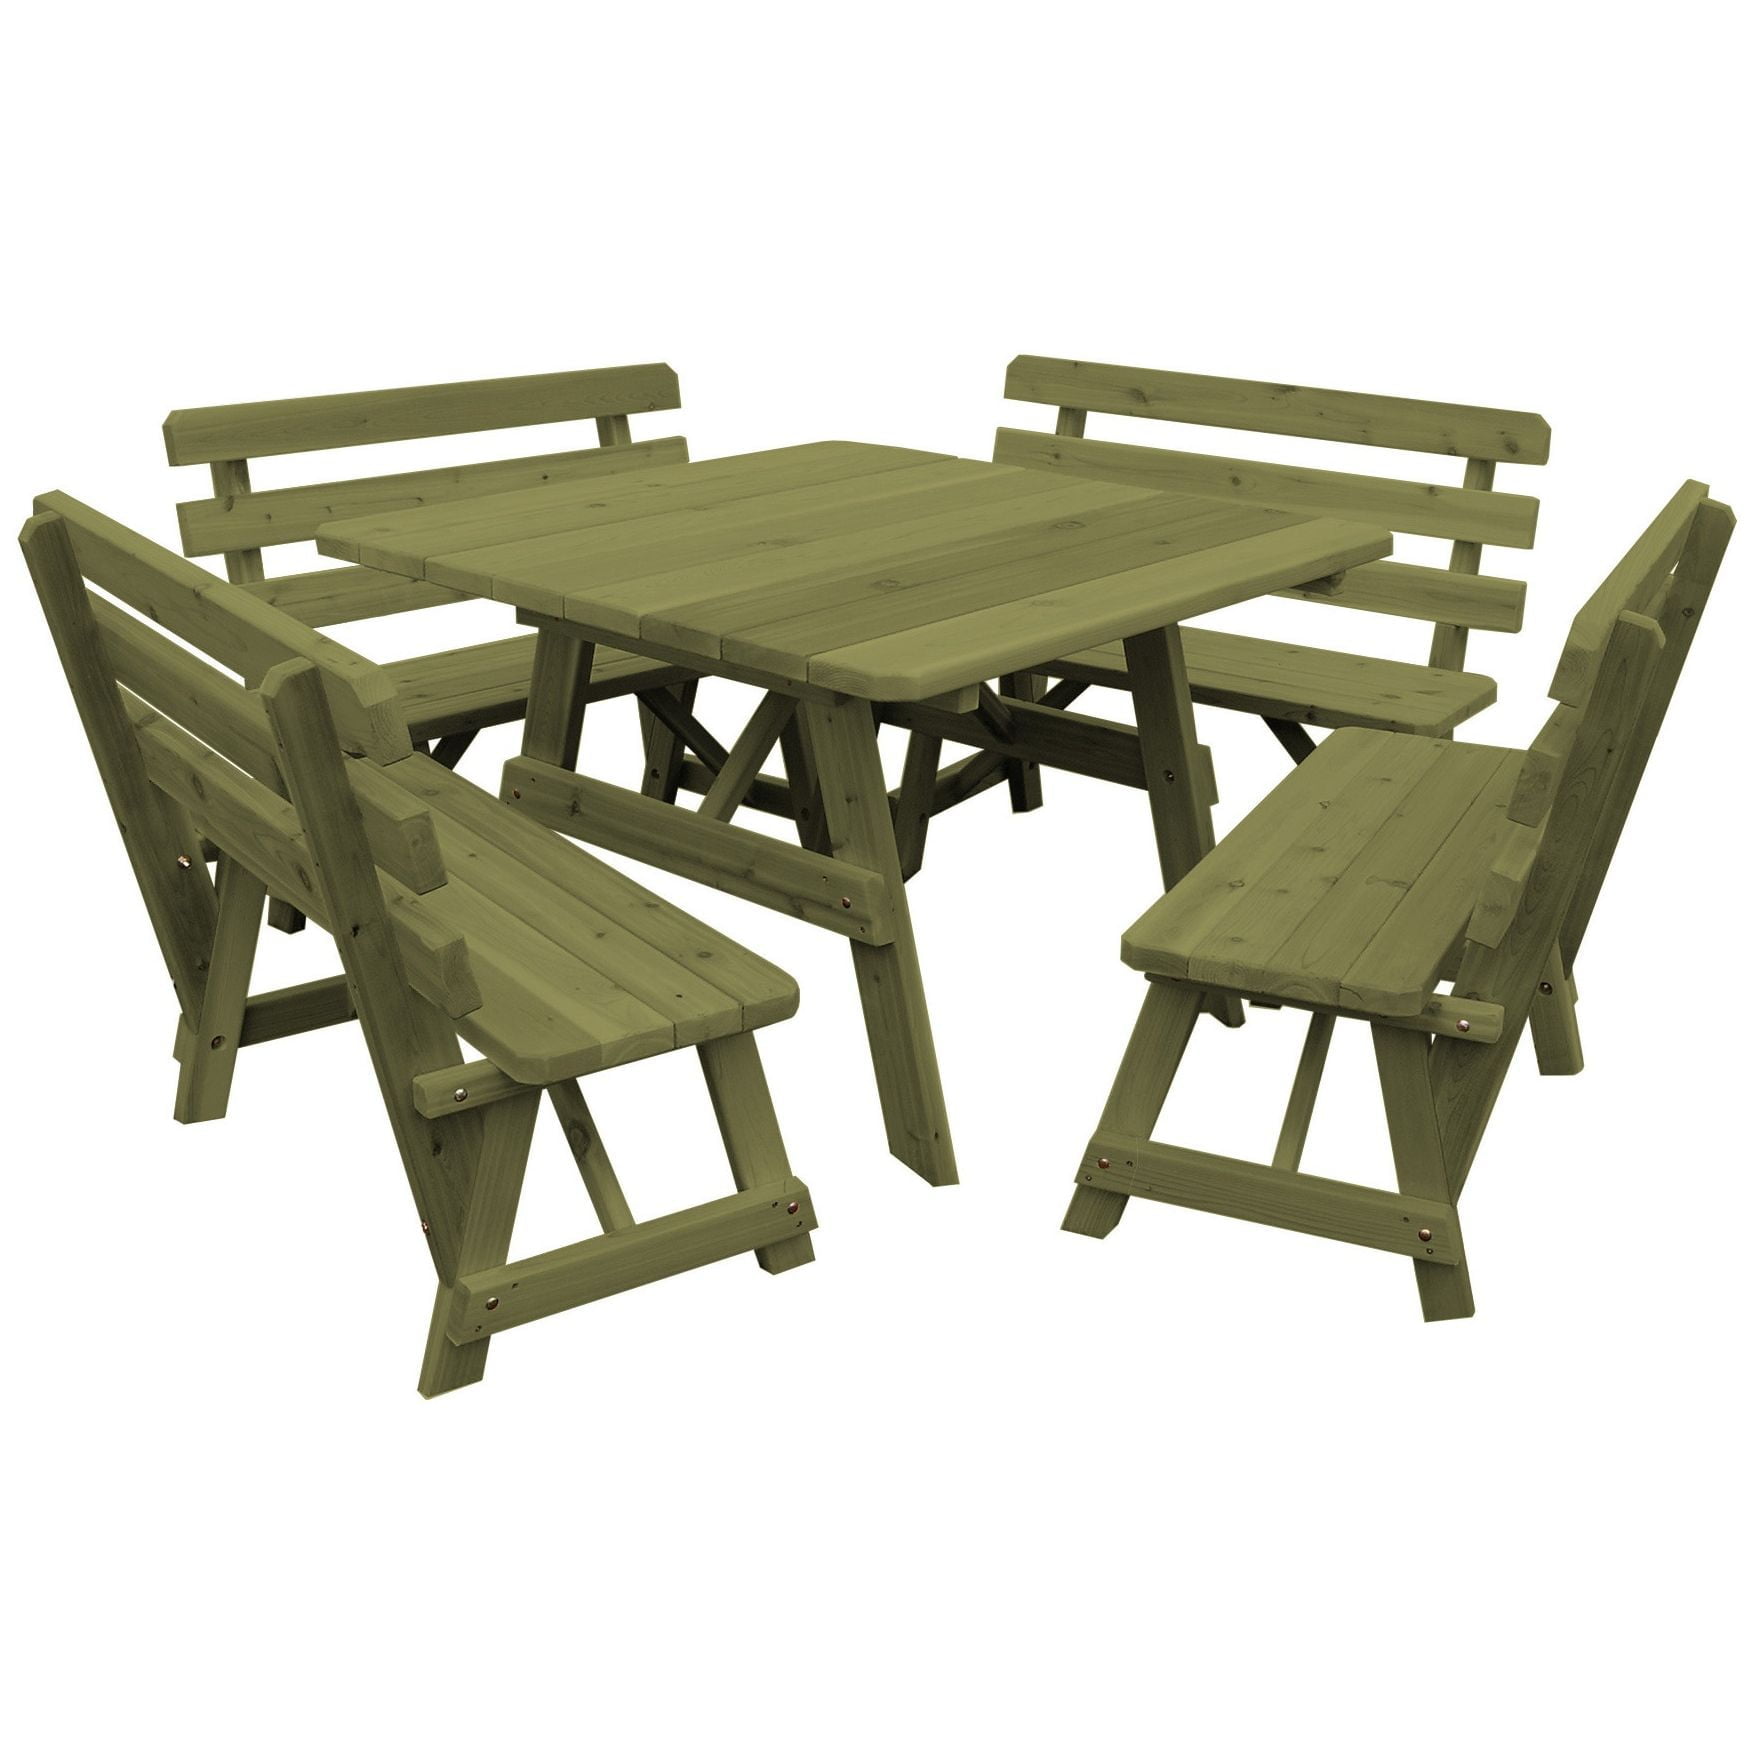 A&L Furniture Cedar Square Table with Backed Benches